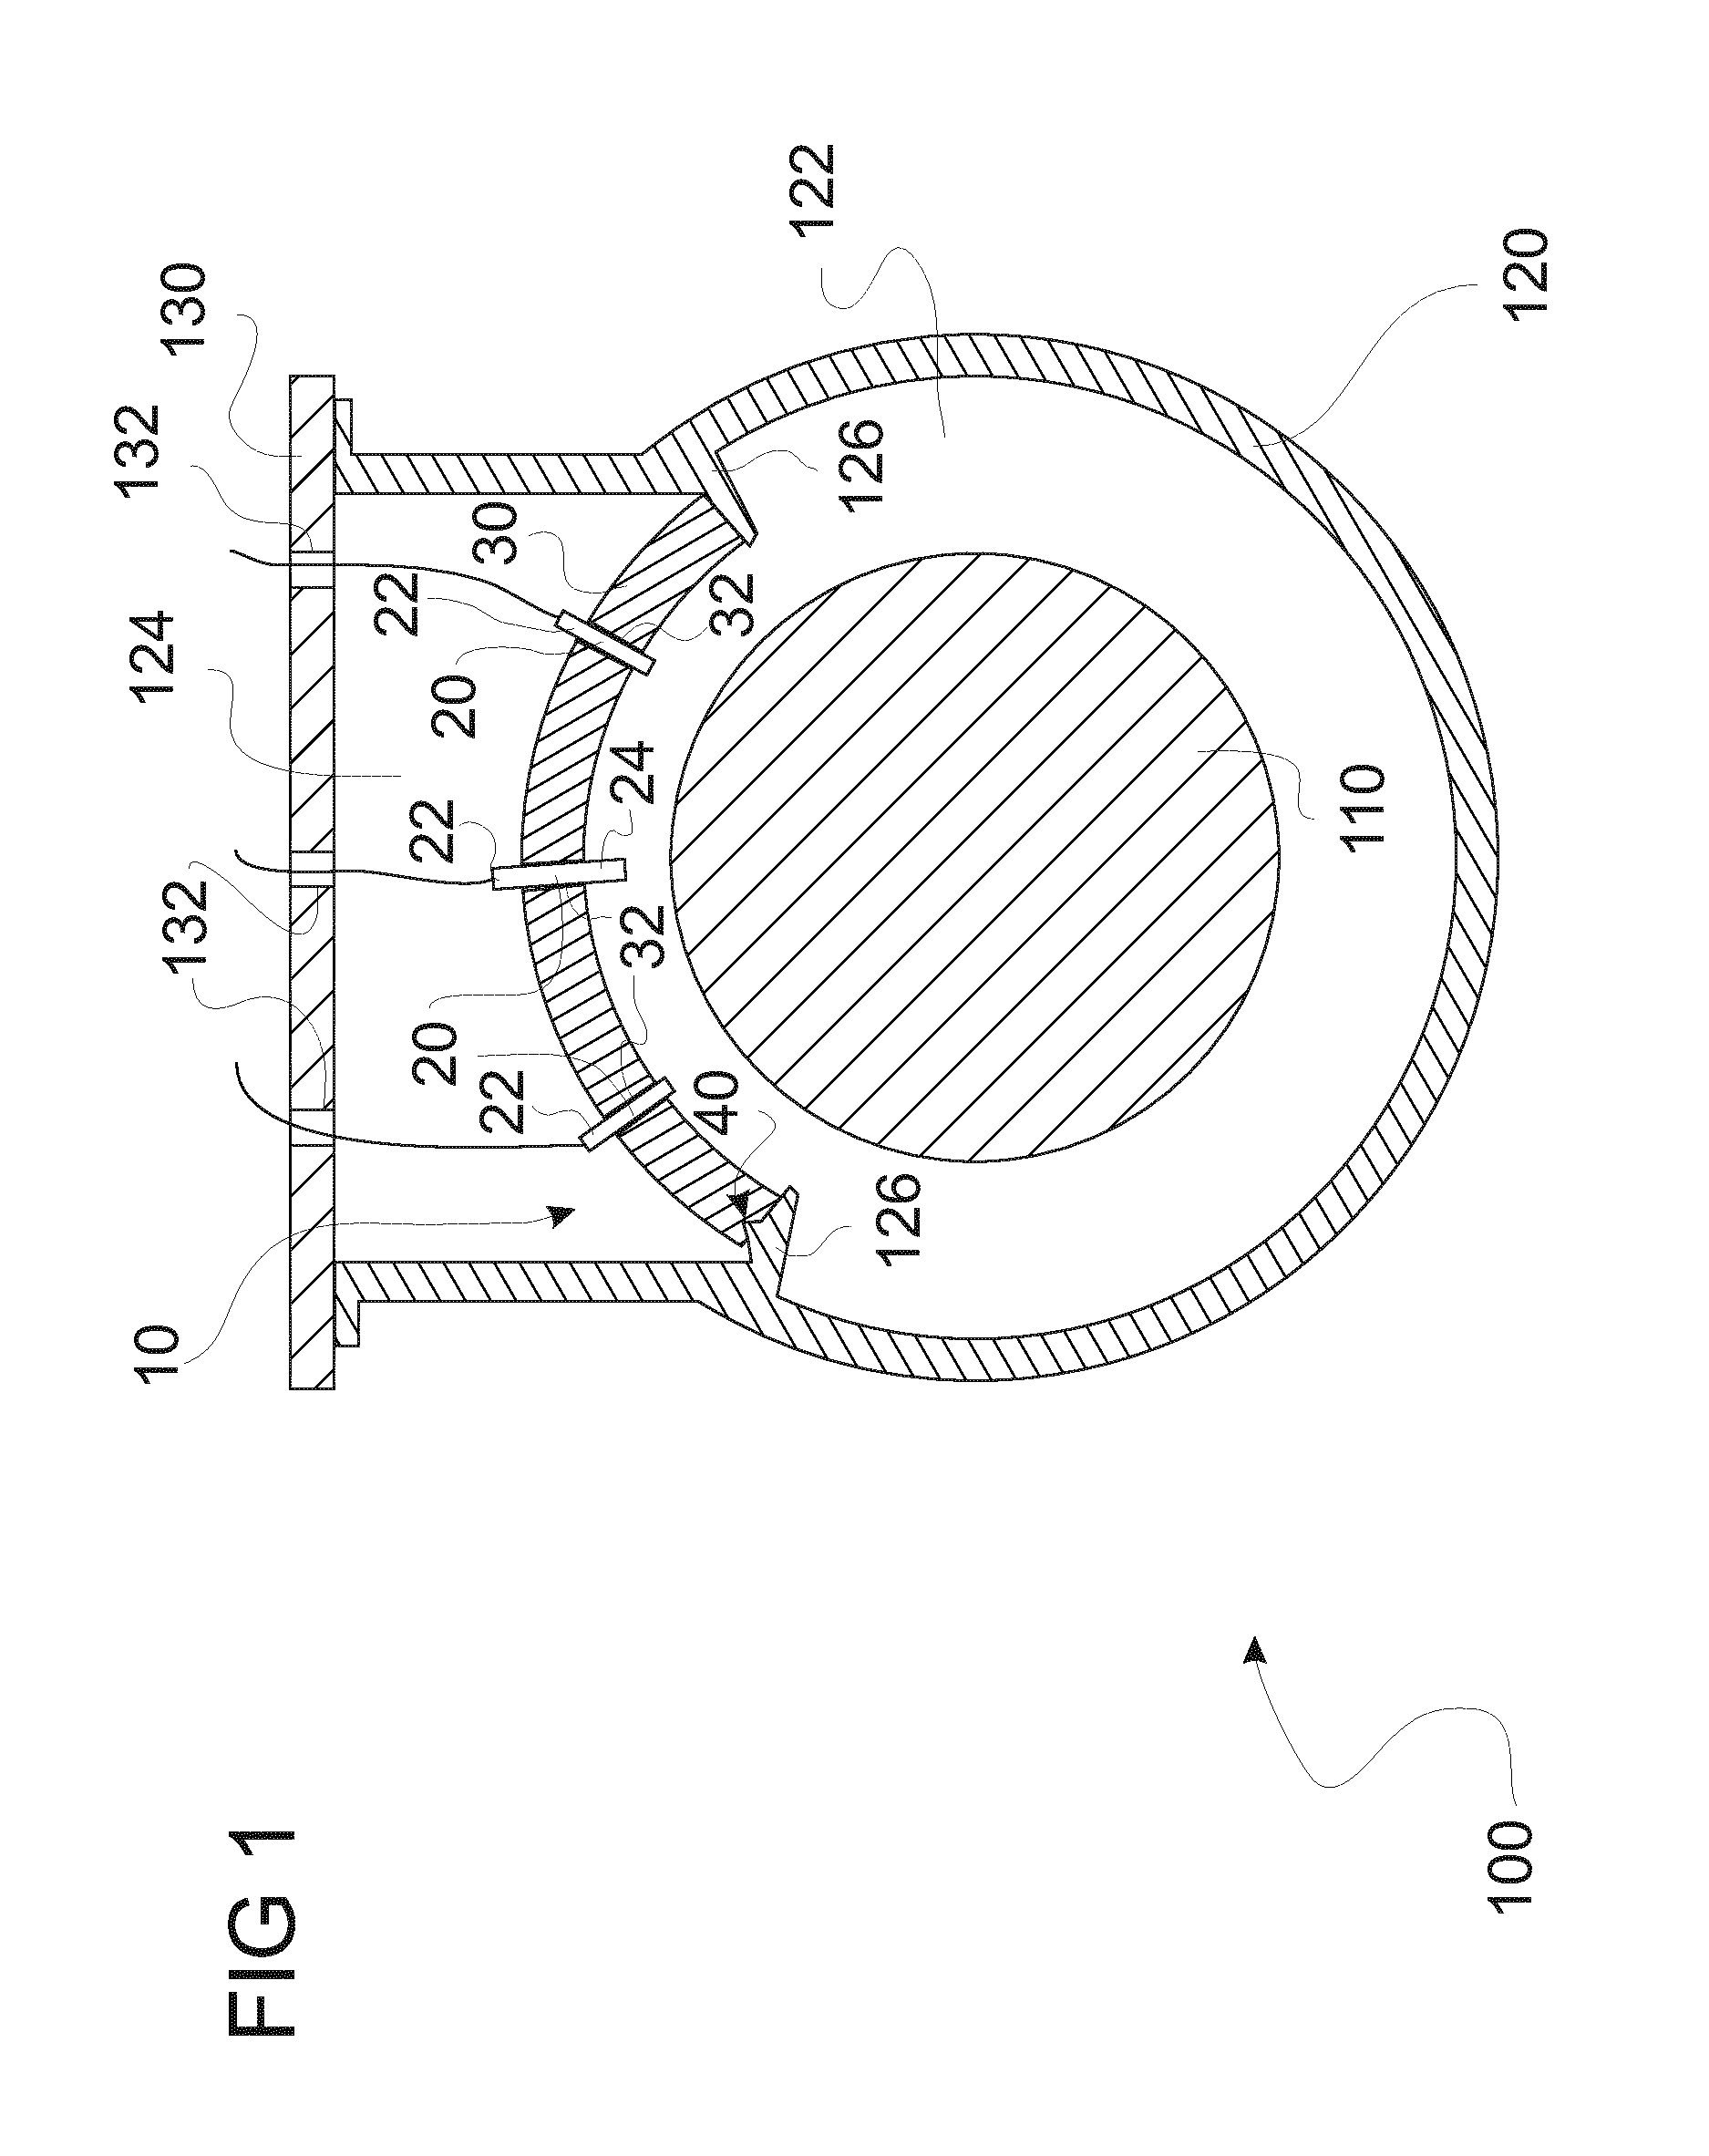 Detecting probe mounting device